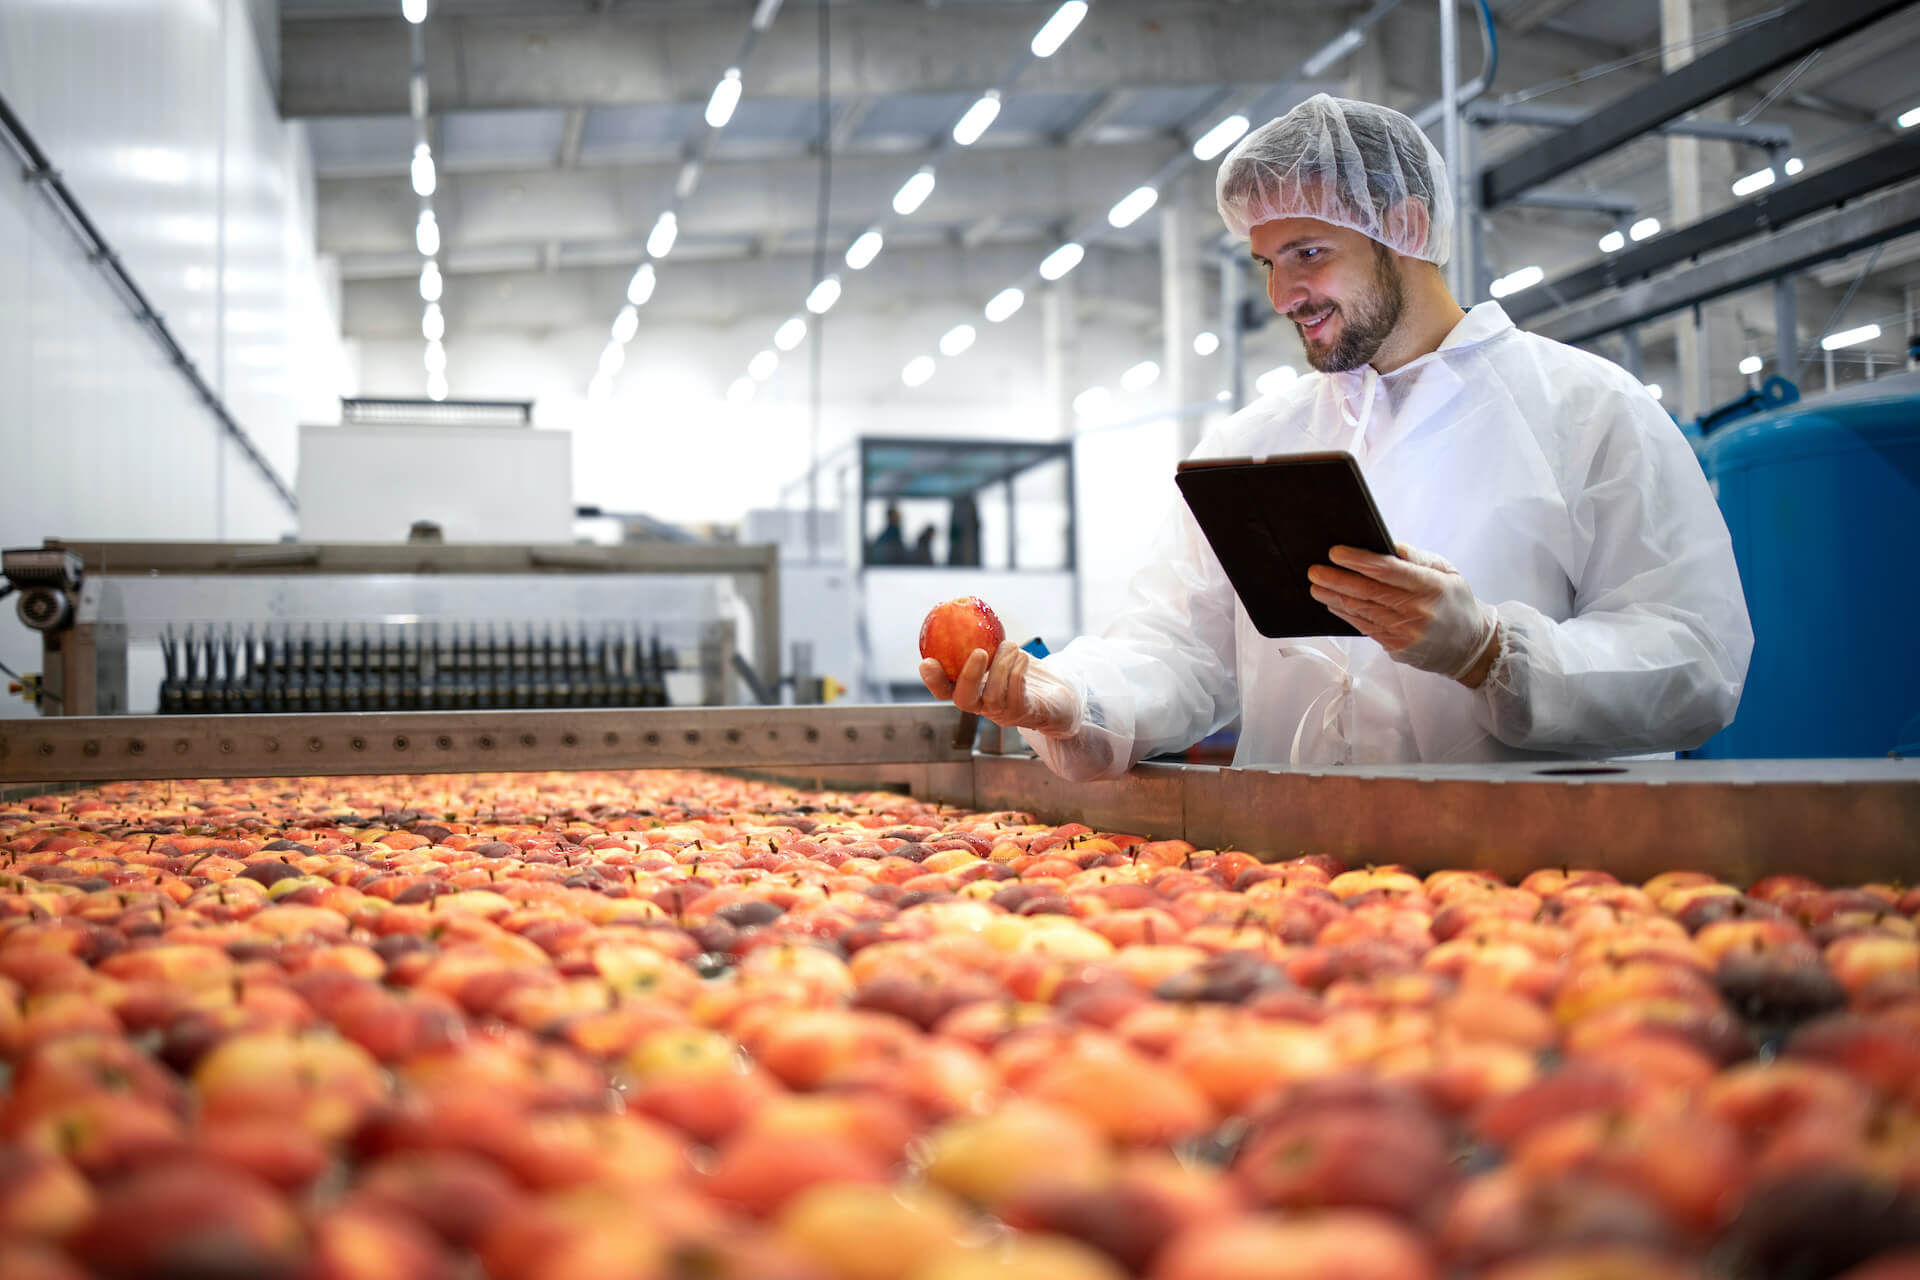 Food producer checking items on conveyor